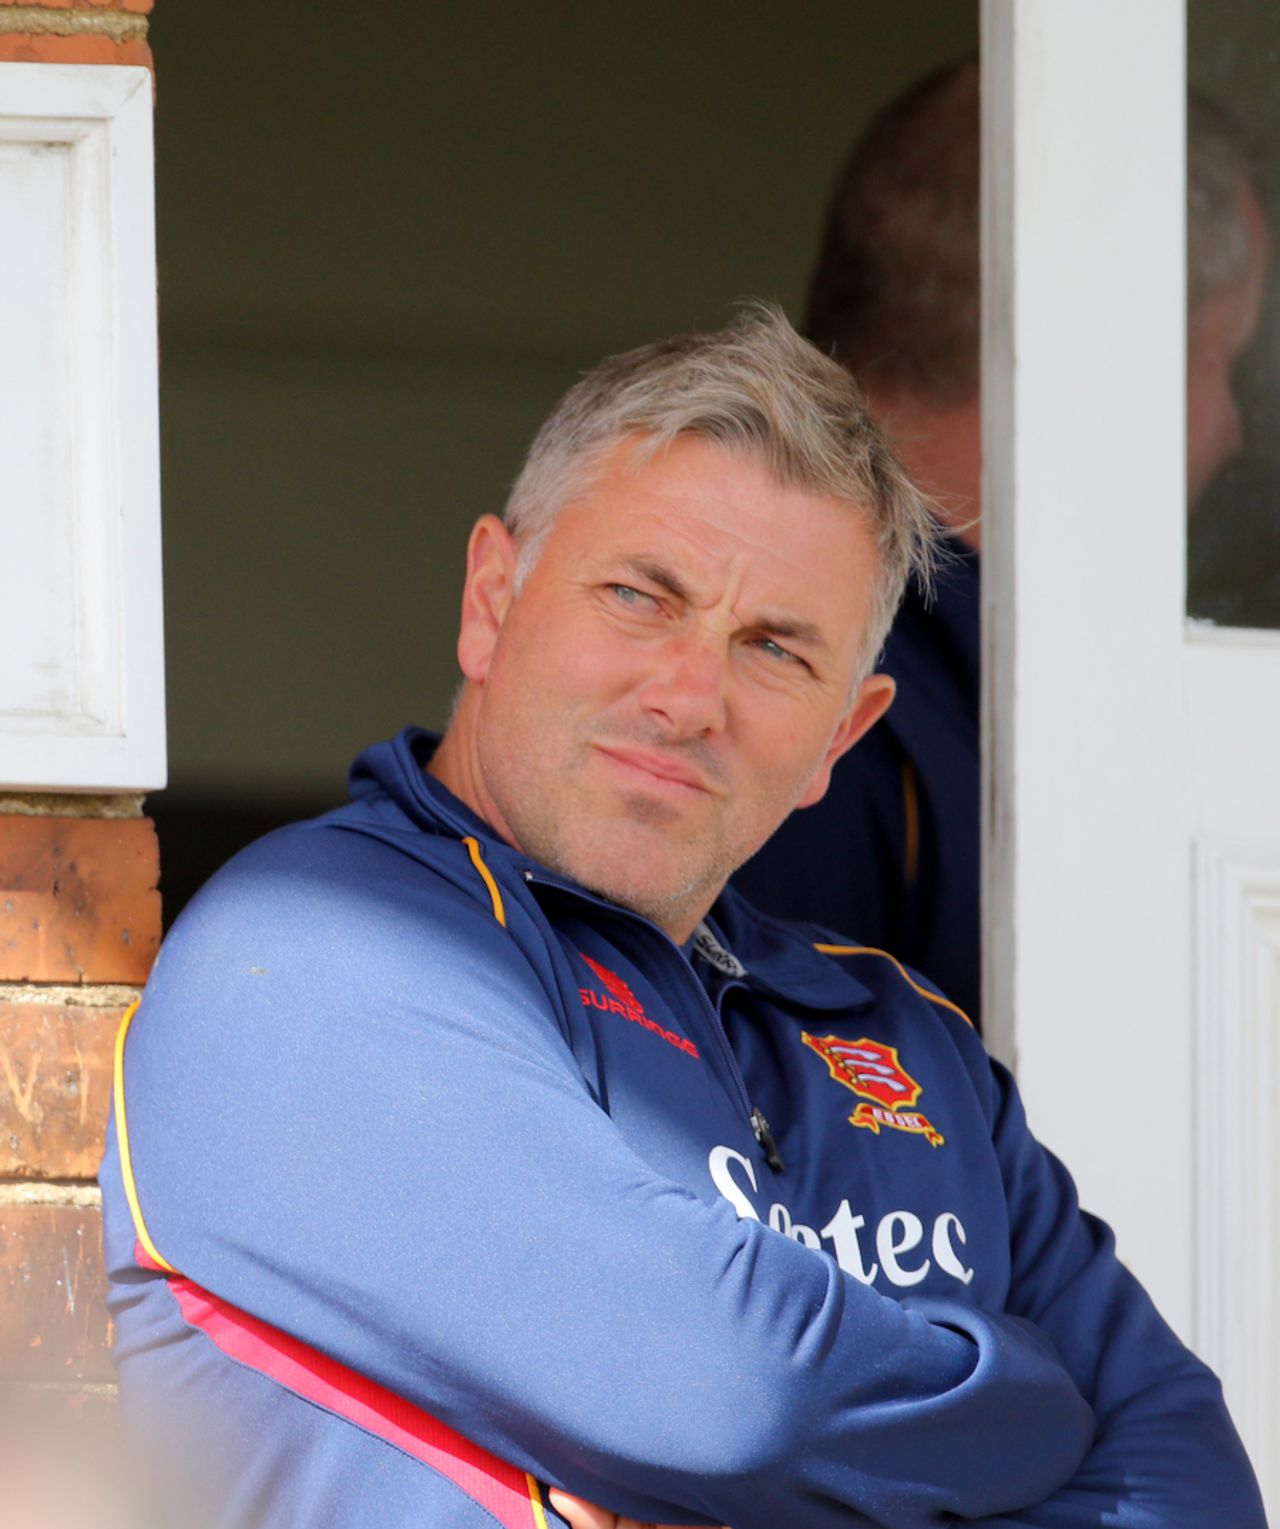 Chris Silverwood reflects on Essex's strengthening title challenge, Yorkshire v Essex, Specsavers Championship, Division One, Scarborough, 2nd day, August 7, 2017